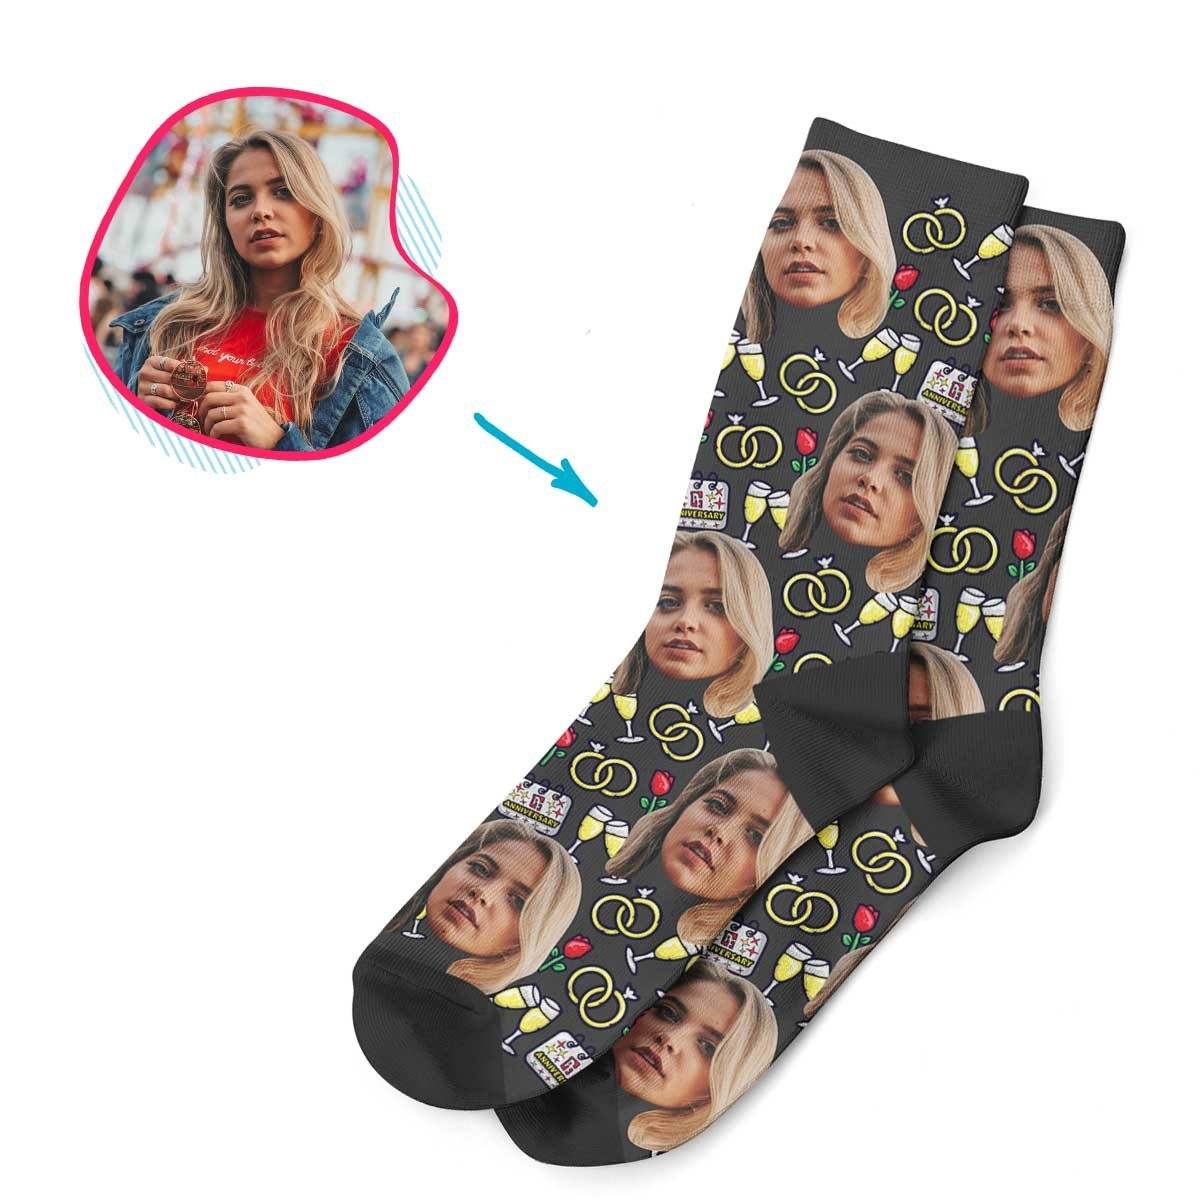 Dark Anniversary personalized socks with photo of face printed on them